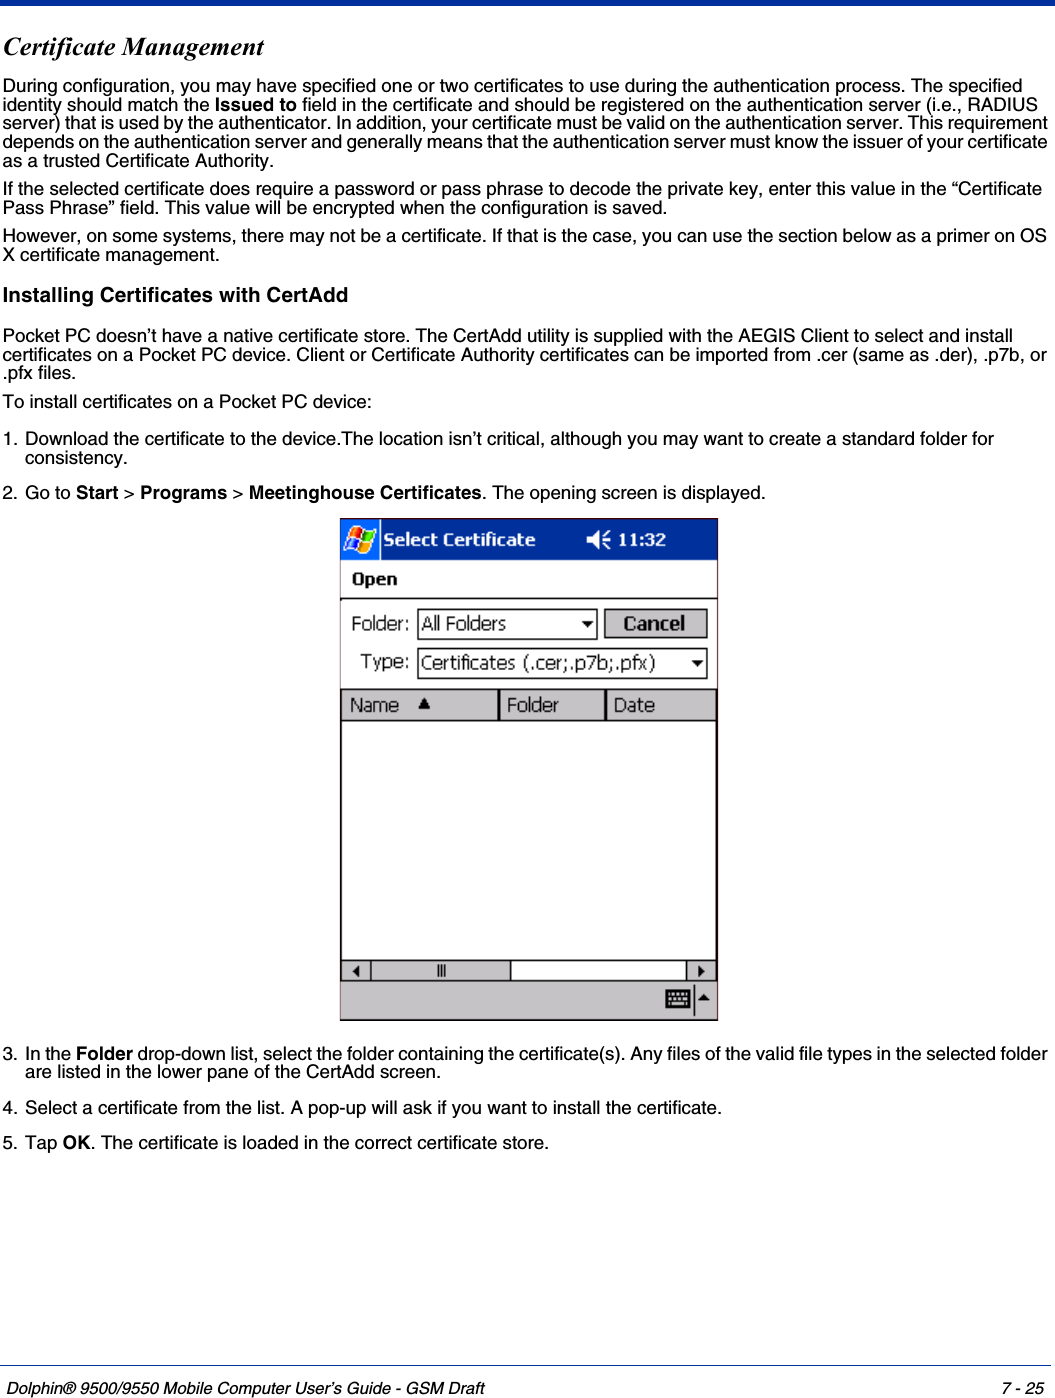 Dolphin® 9500/9550 Mobile Computer User’s Guide - GSM Draft 7 - 25Certificate ManagementDuring configuration, you may have specified one or two certificates to use during the authentication process. The specified identity should match the Issued to field in the certificate and should be registered on the authentication server (i.e., RADIUS server) that is used by the authenticator. In addition, your certificate must be valid on the authentication server. This requirement depends on the authentication server and generally means that the authentication server must know the issuer of your certificate as a trusted Certificate Authority. If the selected certificate does require a password or pass phrase to decode the private key, enter this value in the “Certificate Pass Phrase” field. This value will be encrypted when the configuration is saved.However, on some systems, there may not be a certificate. If that is the case, you can use the section below as a primer on OS X certificate management.Installing Certificates with CertAddPocket PC doesn’t have a native certificate store. The CertAdd utility is supplied with the AEGIS Client to select and install certificates on a Pocket PC device. Client or Certificate Authority certificates can be imported from .cer (same as .der), .p7b, or .pfx files.To install certificates on a Pocket PC device:1. Download the certificate to the device.The location isn’t critical, although you may want to create a standard folder for consistency.2. Go to Start &gt; Programs &gt; Meetinghouse Certificates. The opening screen is displayed. 3. In the Folder drop-down list, select the folder containing the certificate(s). Any files of the valid file types in the selected folder are listed in the lower pane of the CertAdd screen.4. Select a certificate from the list. A pop-up will ask if you want to install the certificate.5. Tap OK. The certificate is loaded in the correct certificate store.